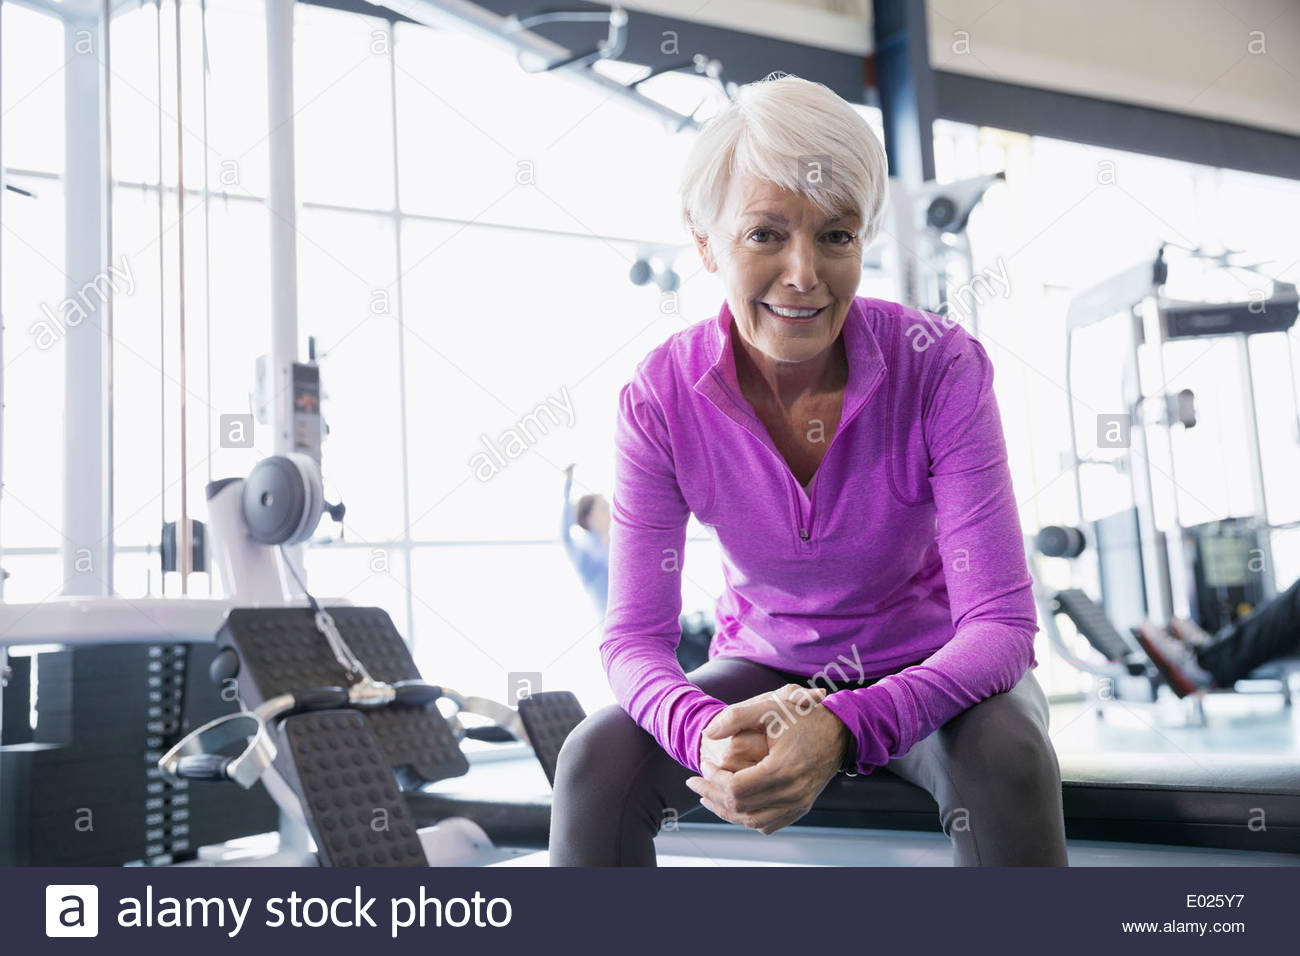 Portrait of smiling woman at gym Stock Photo